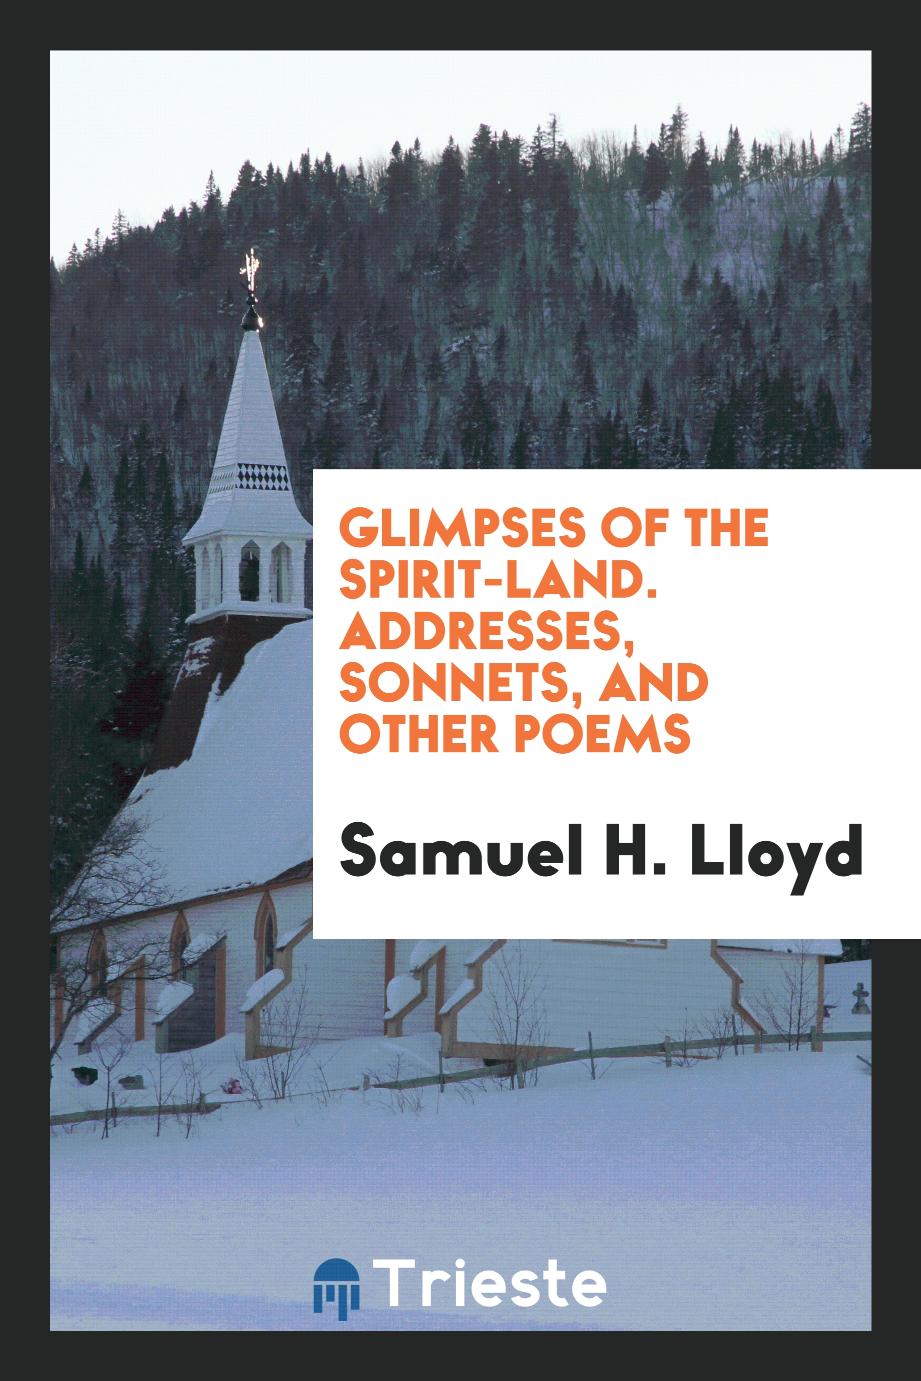 Glimpses of the Spirit-Land. Addresses, Sonnets, and Other Poems